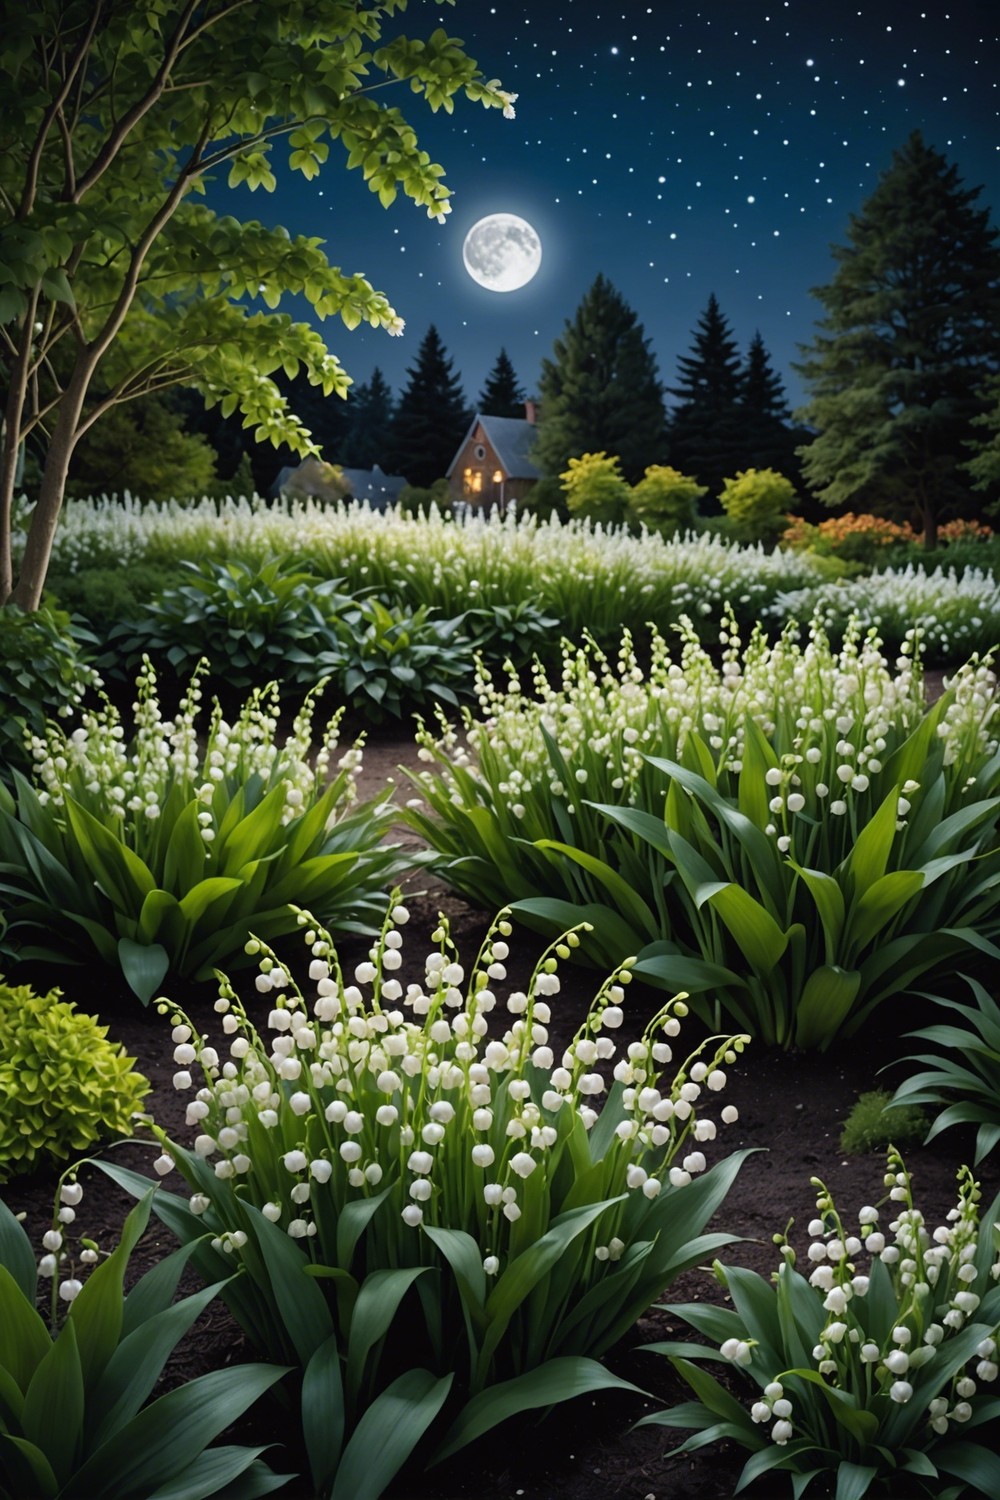 Plant Lily of the Valley in a Moon Garden for a Magical Nighttime Display